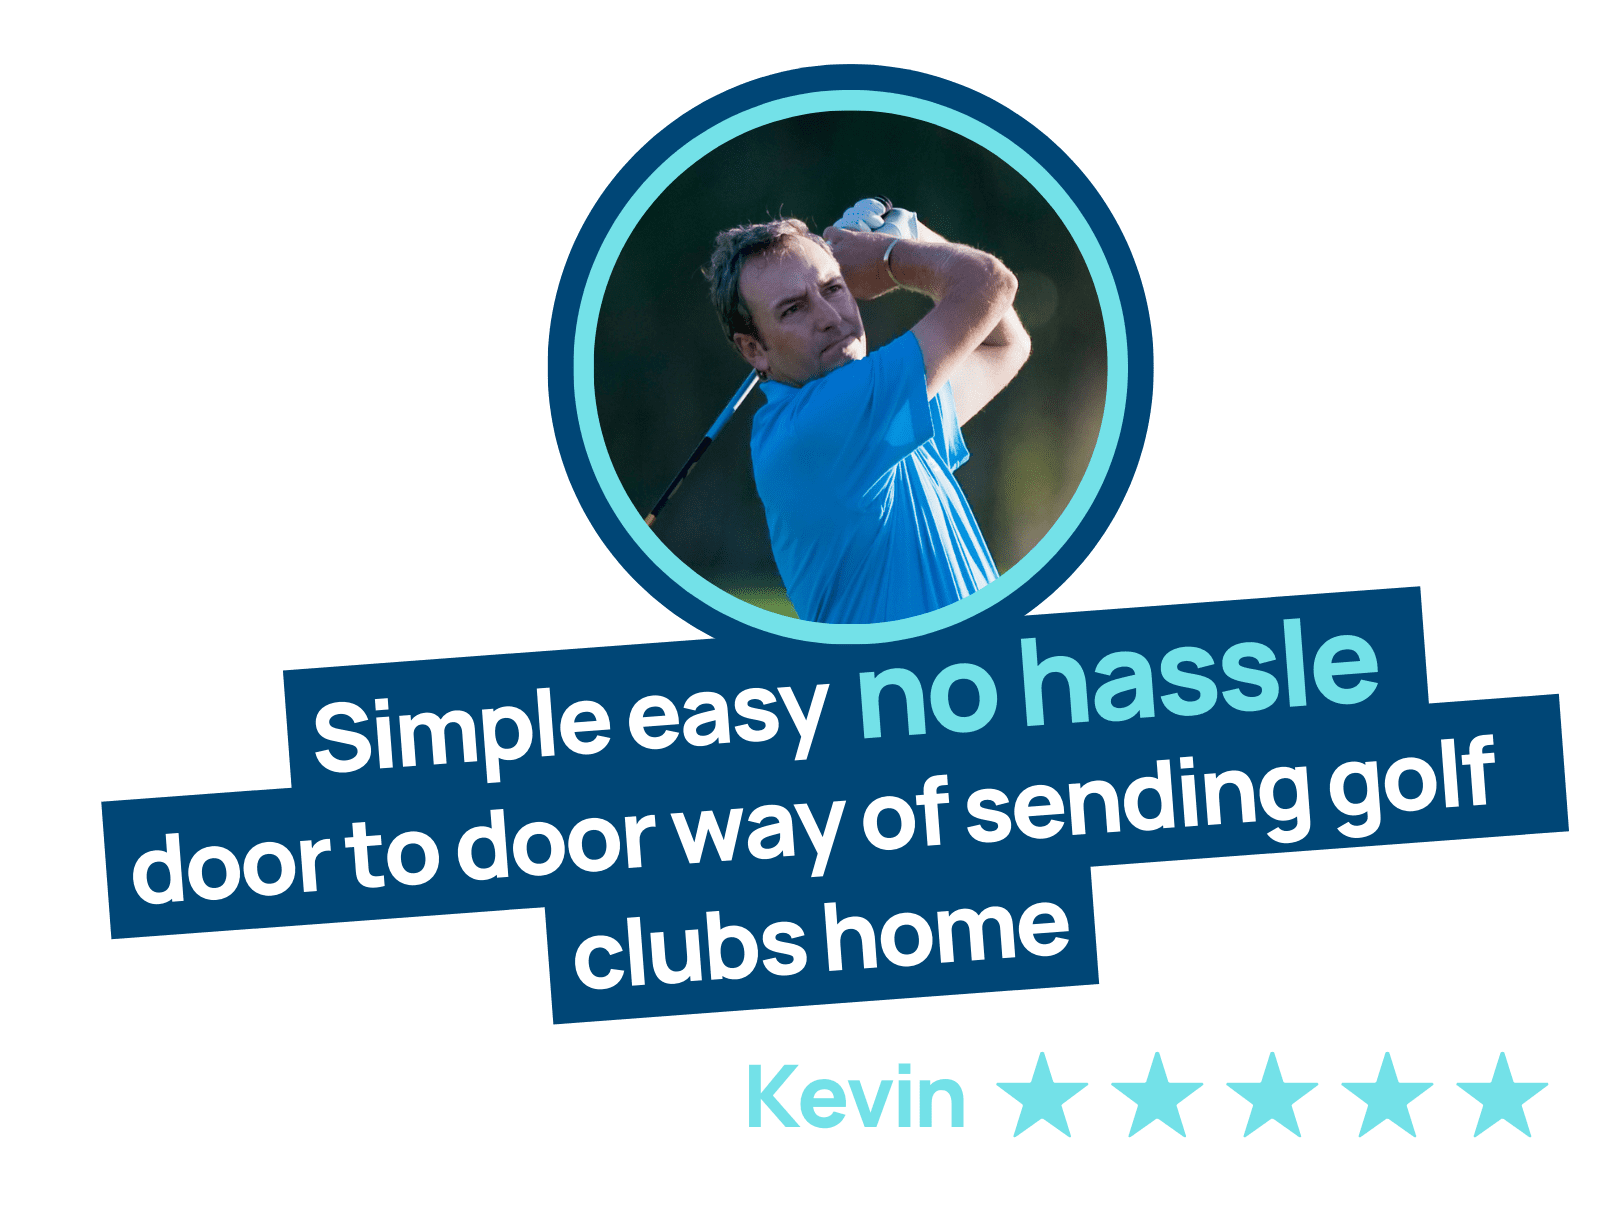 Golf Review - Kevin